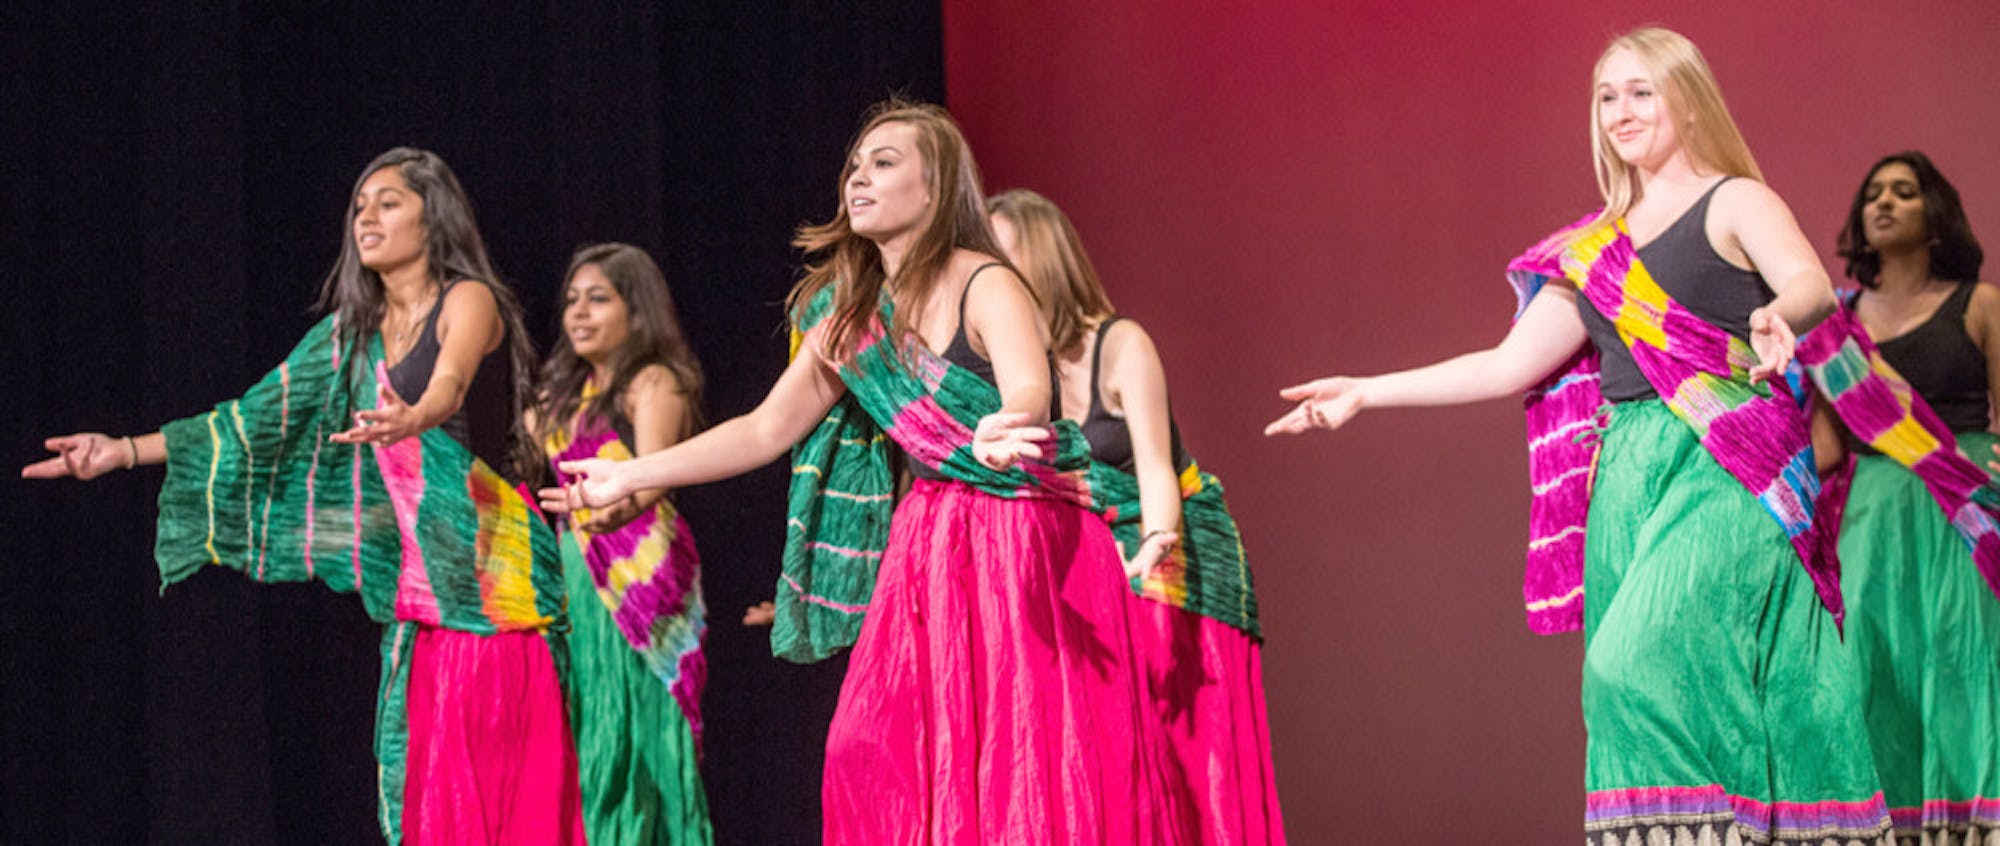 The Indian Association of Notre Dame performs a Bollywood dance at Thursday night’s rehearsal for this weekend’s Asian Allure shows.